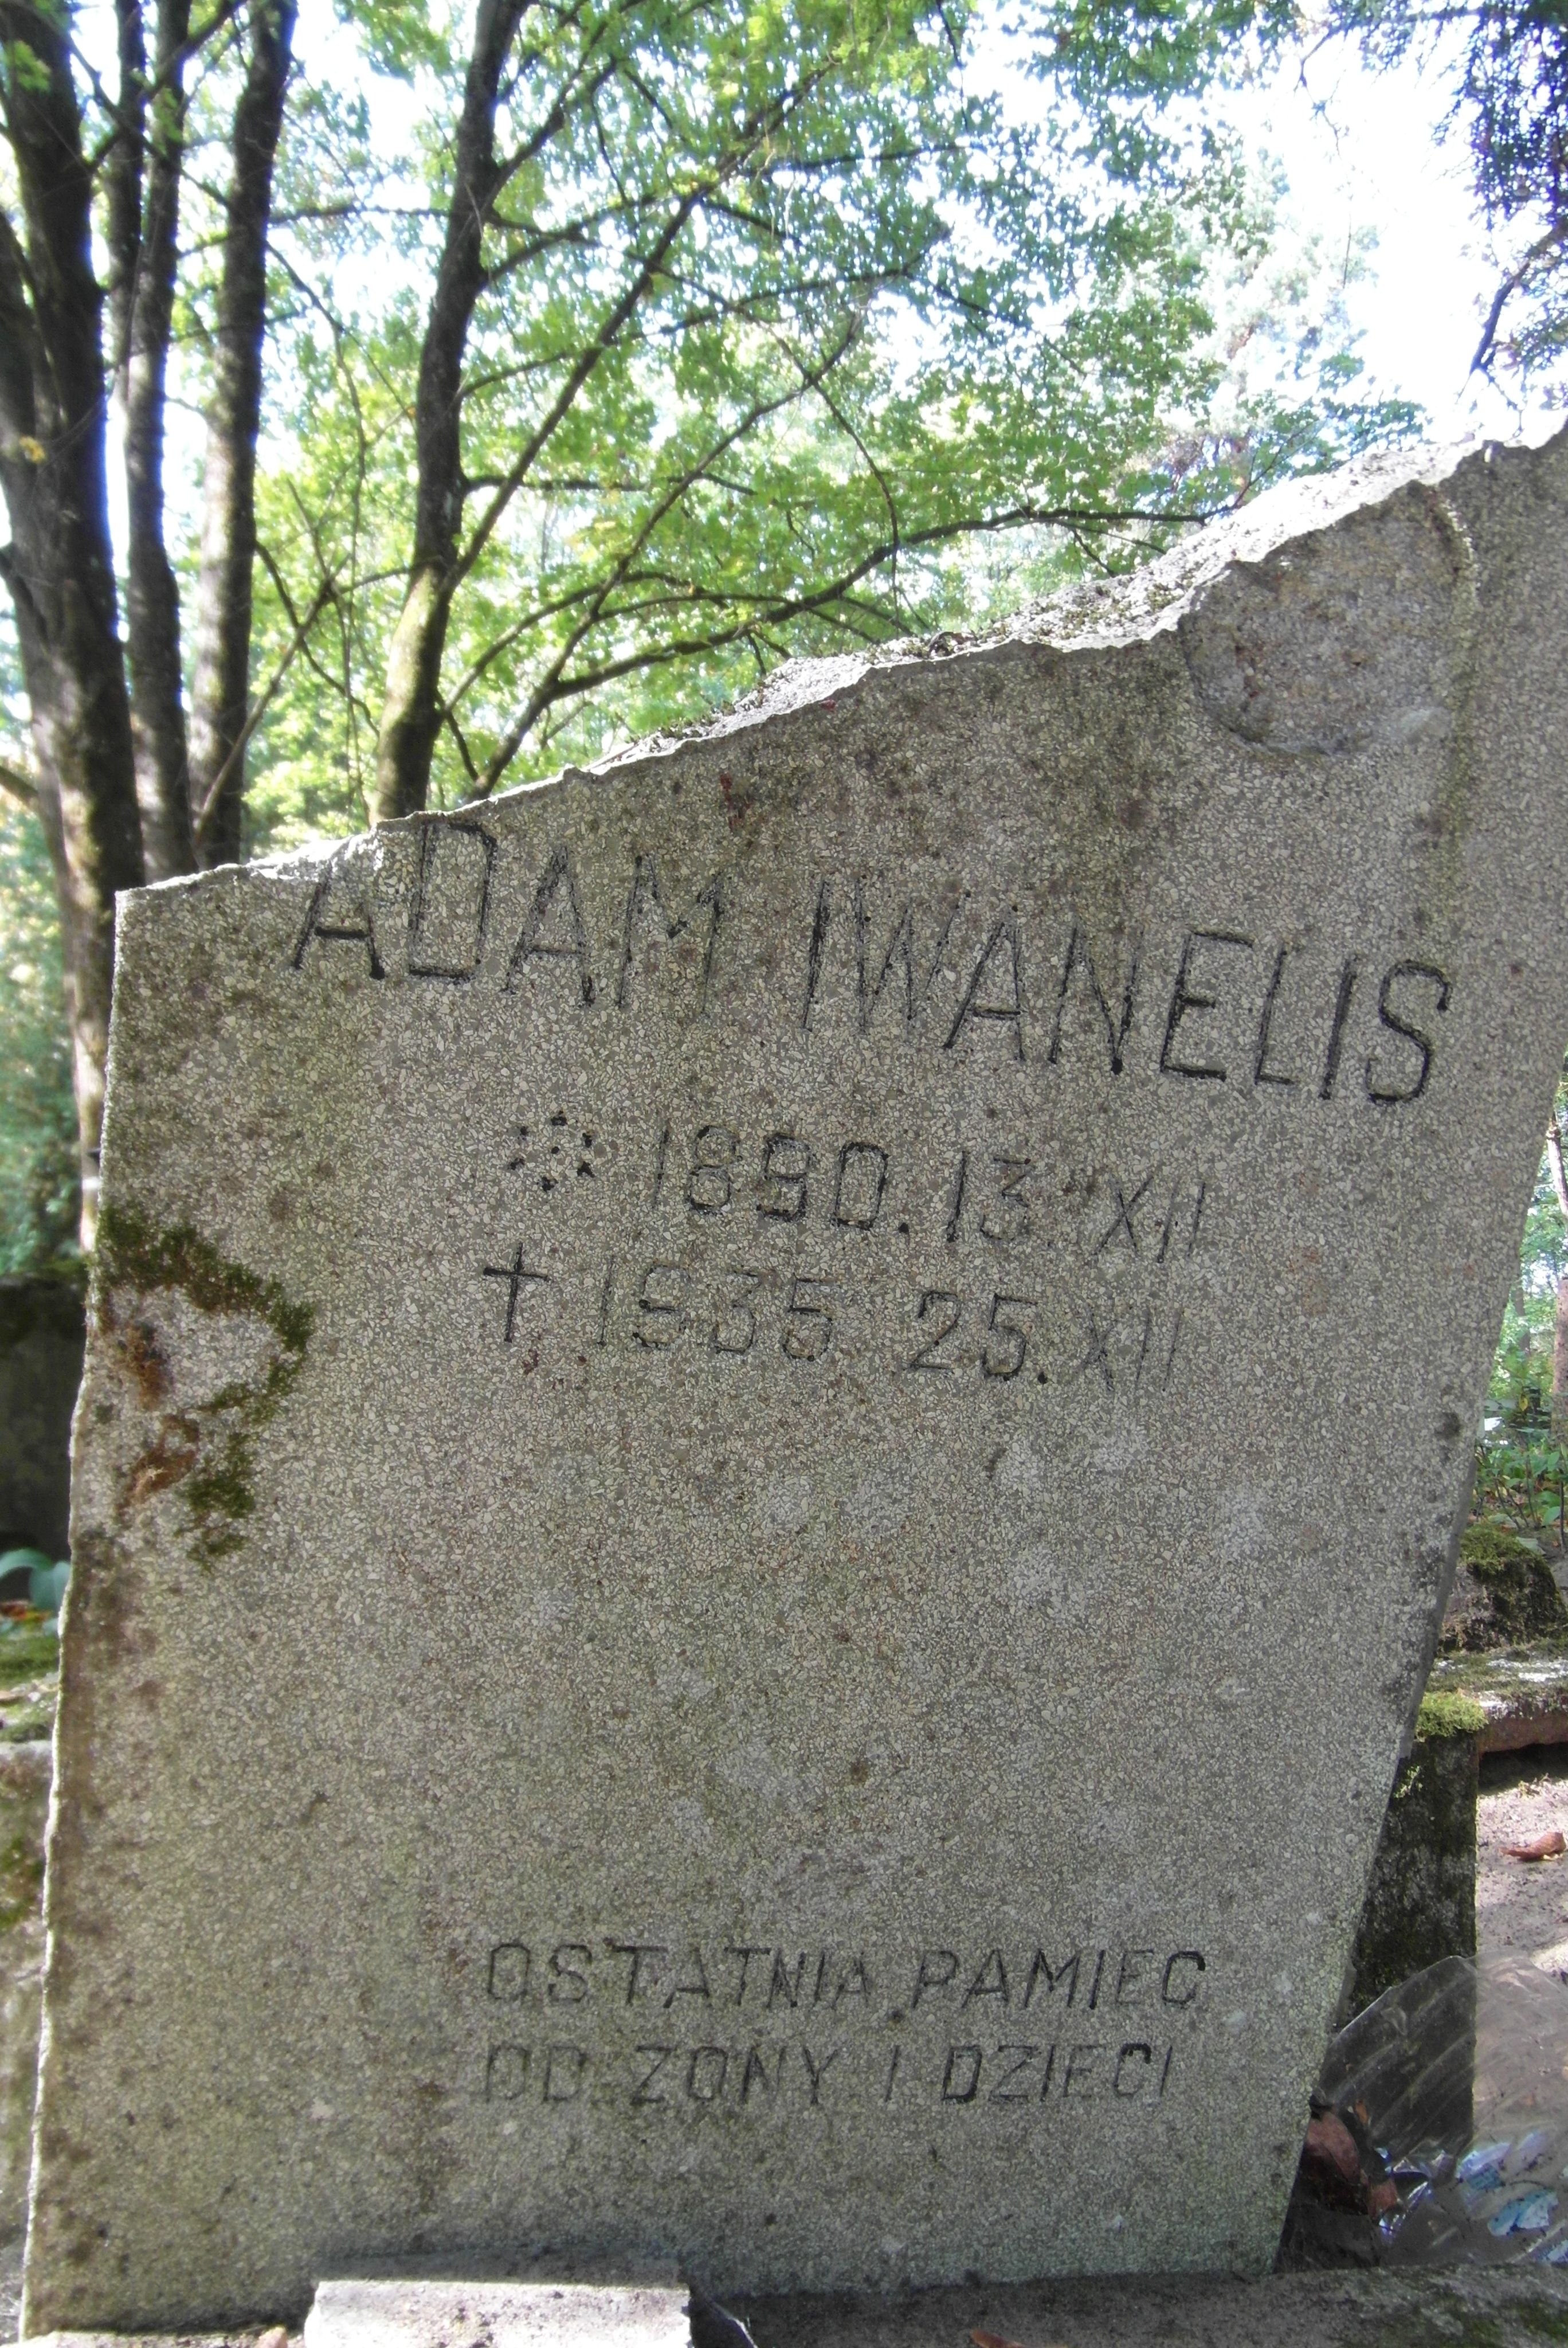 Inscription from the gravestone of Adam Ivanelis, St Michael's cemetery in Riga, as of 2021.